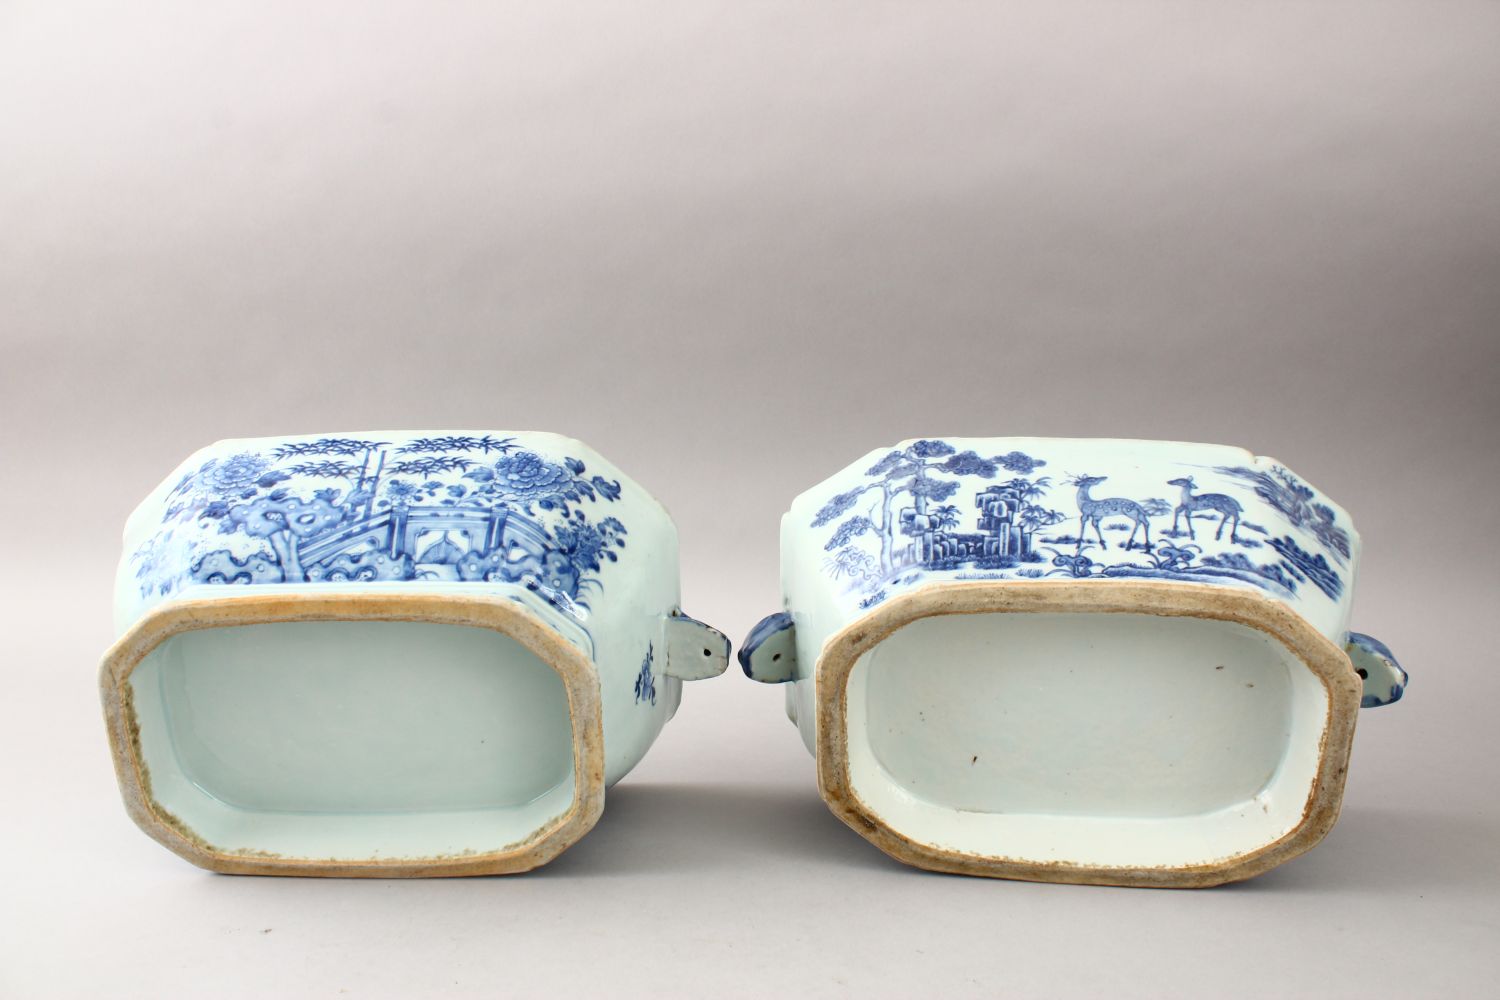 TWO 18TH CENTURY CHINESE BLUE & WHITE PORCELAIN TUREENS, with one associated cover, both decorated - Image 5 of 5